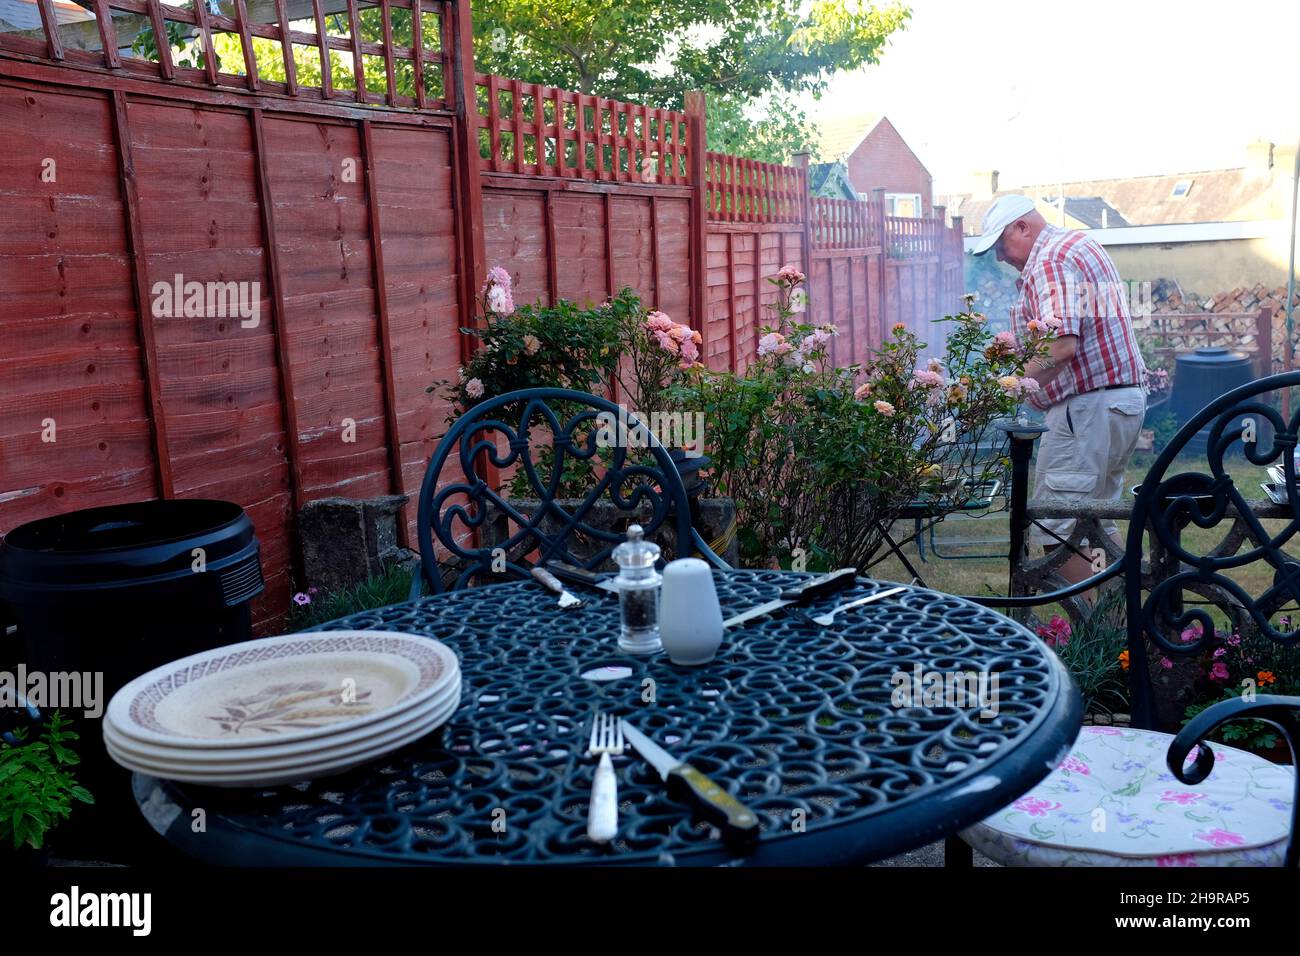 garden,barbi,barbeque,table,man,cooking,narrow,back,plates,cutlery, Cowes,Isle of Wight,England,UK, Stock Photo